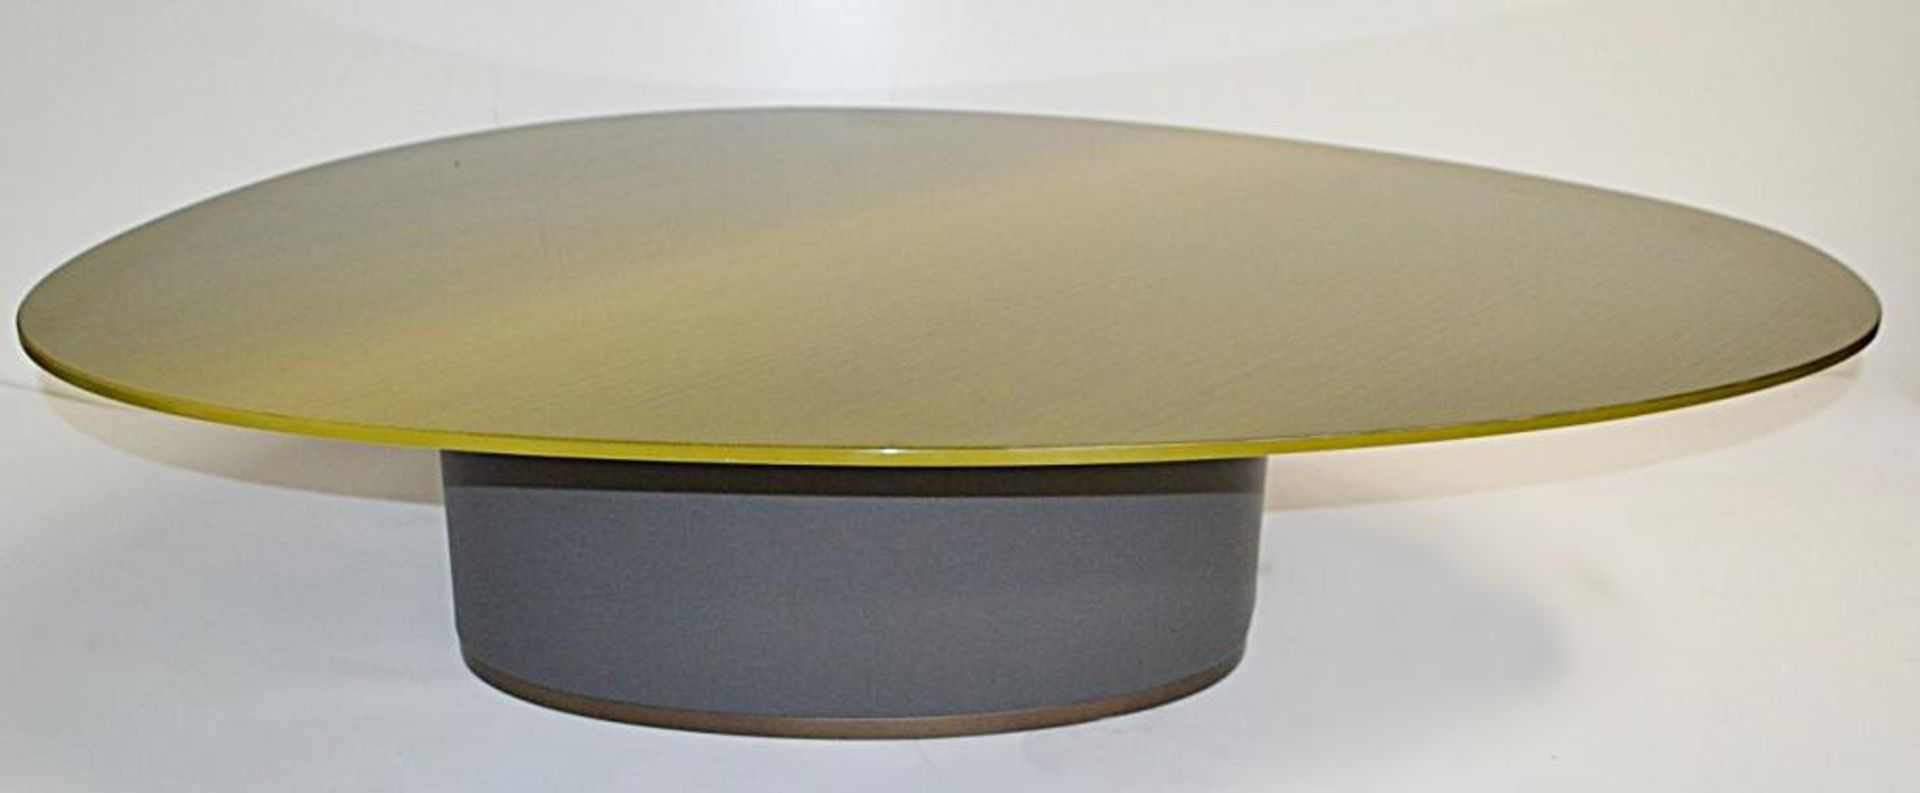 1 x Giorgetti 'Galet' Leather Upholstered Designer Table With A Lacquered Top - Image 3 of 5